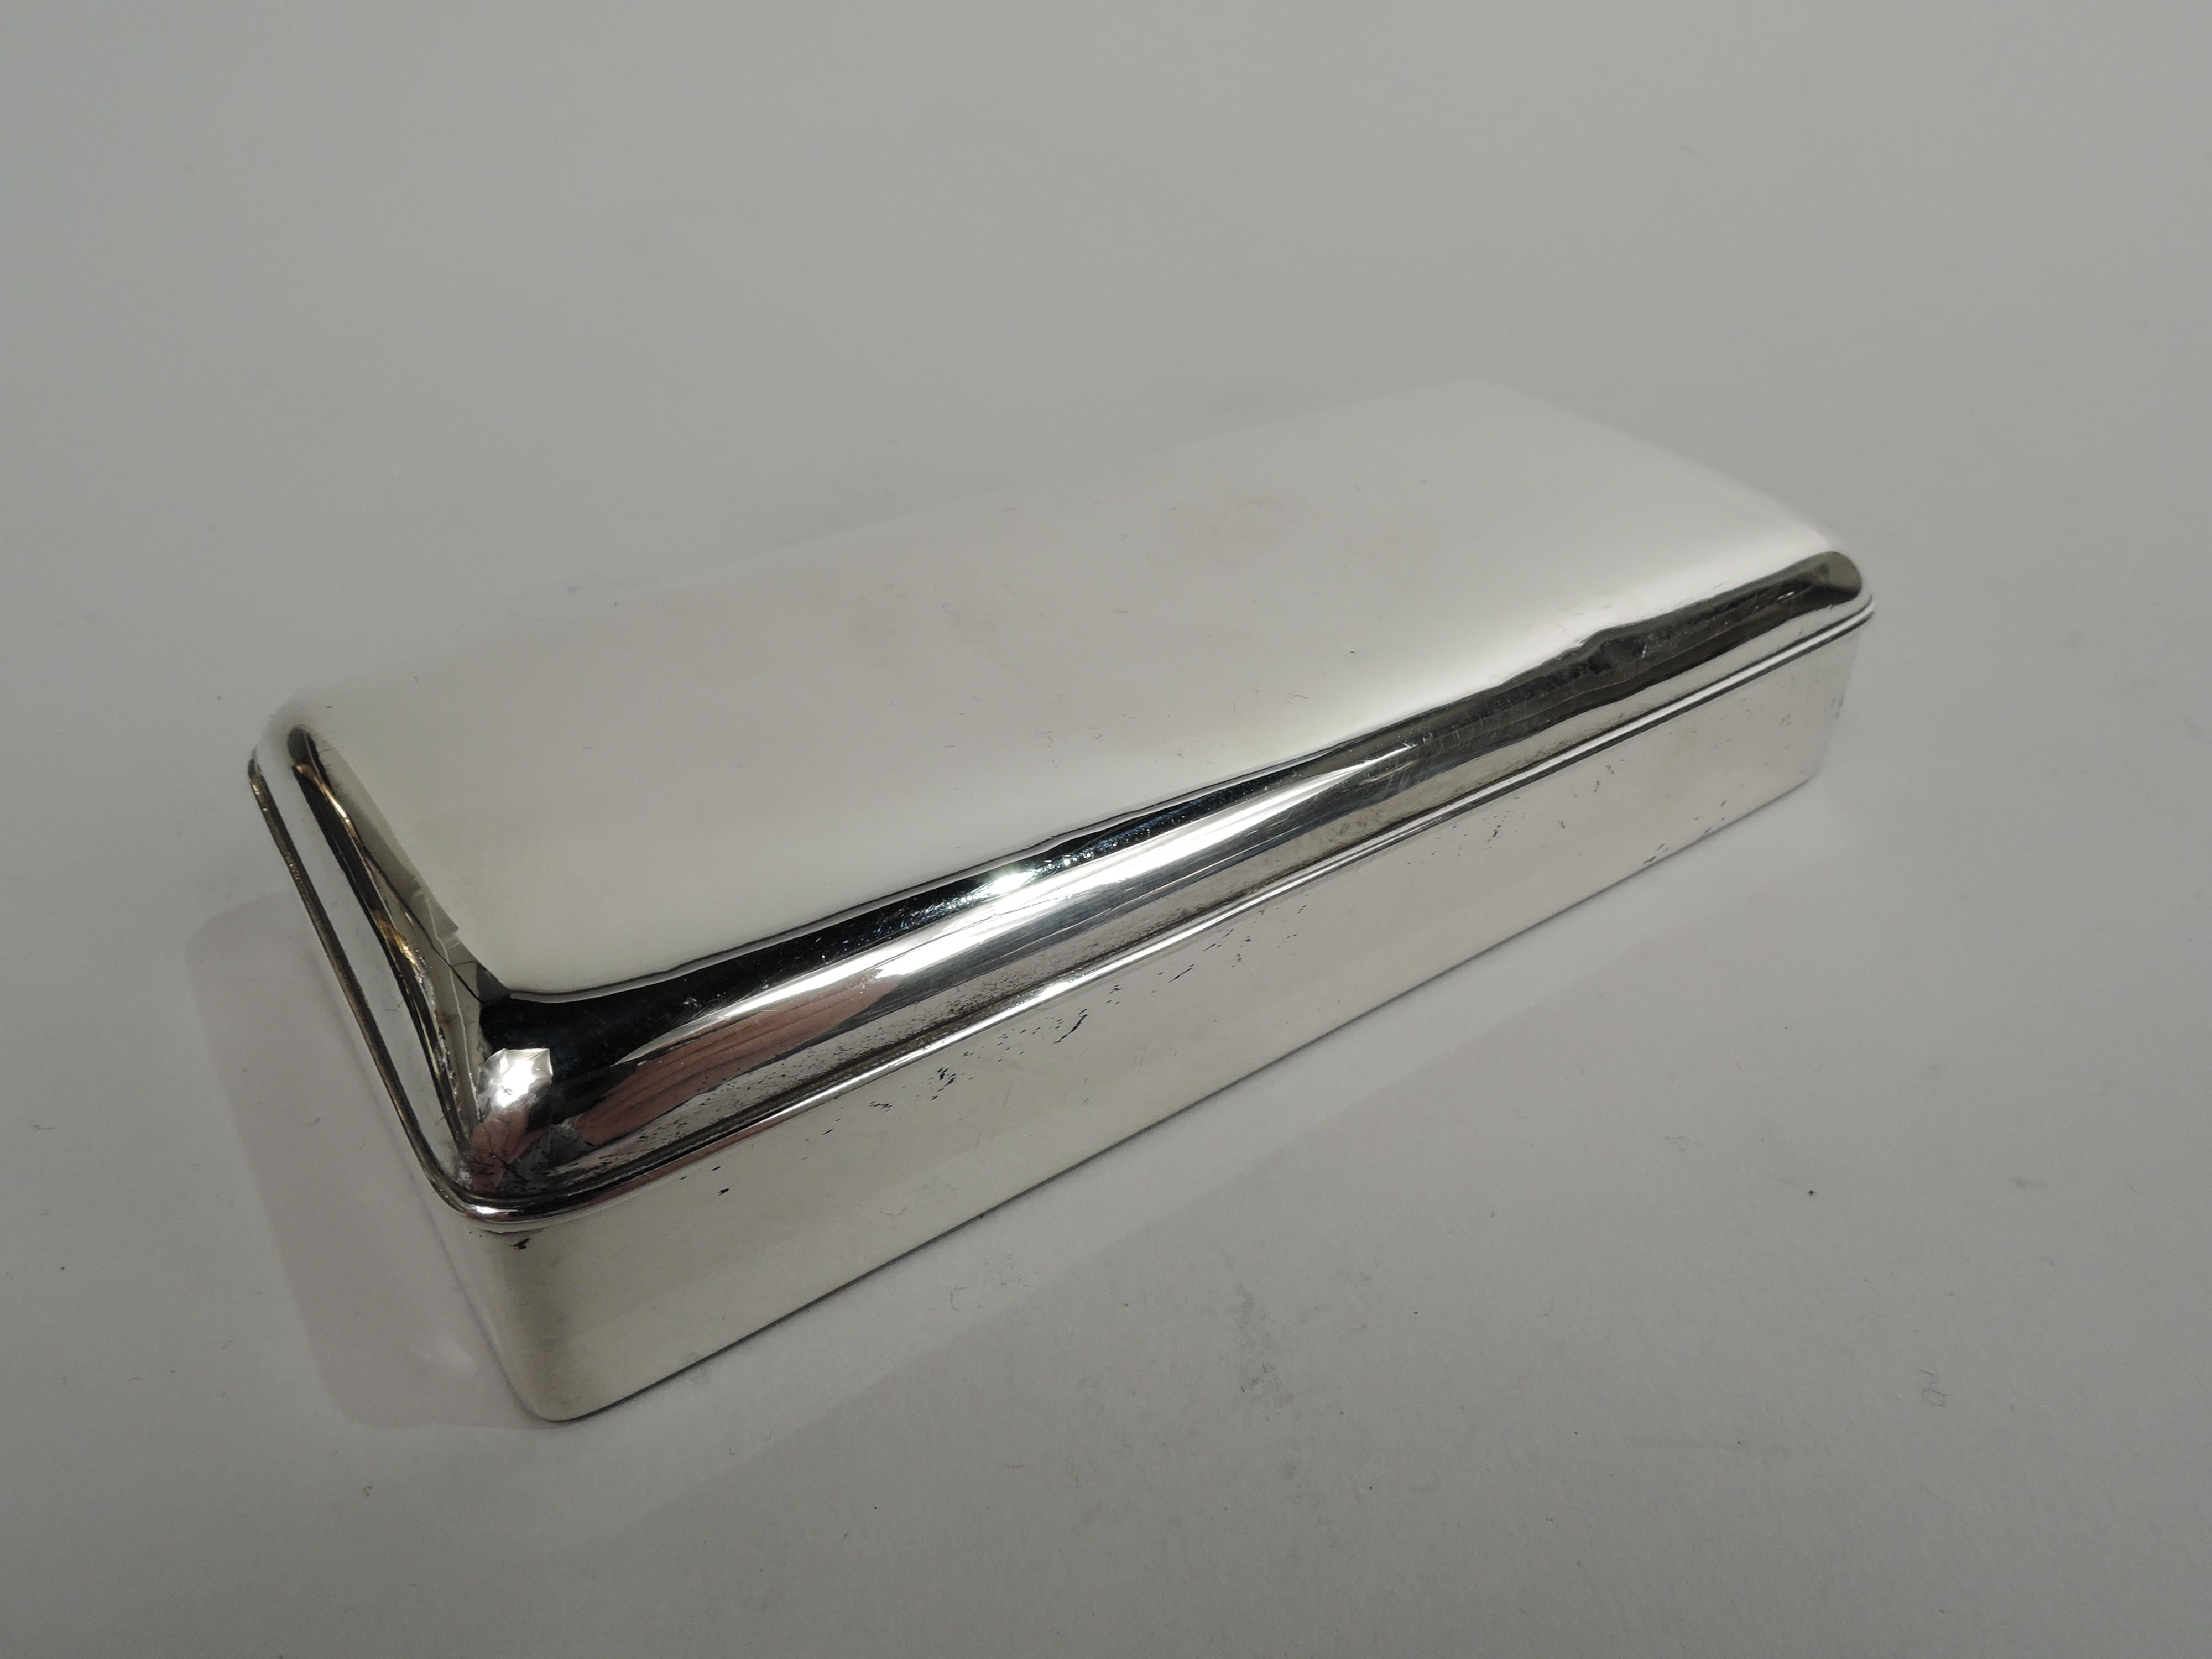 Victorian Modern sterling silver box. Made by Gorham in Providence in 1889. Rectangular with straight sides and curved corners. Cover hinged and raised. Gilt interior. Small and compact. Fully marked including maker’s stamp, date symbol, no. 265,